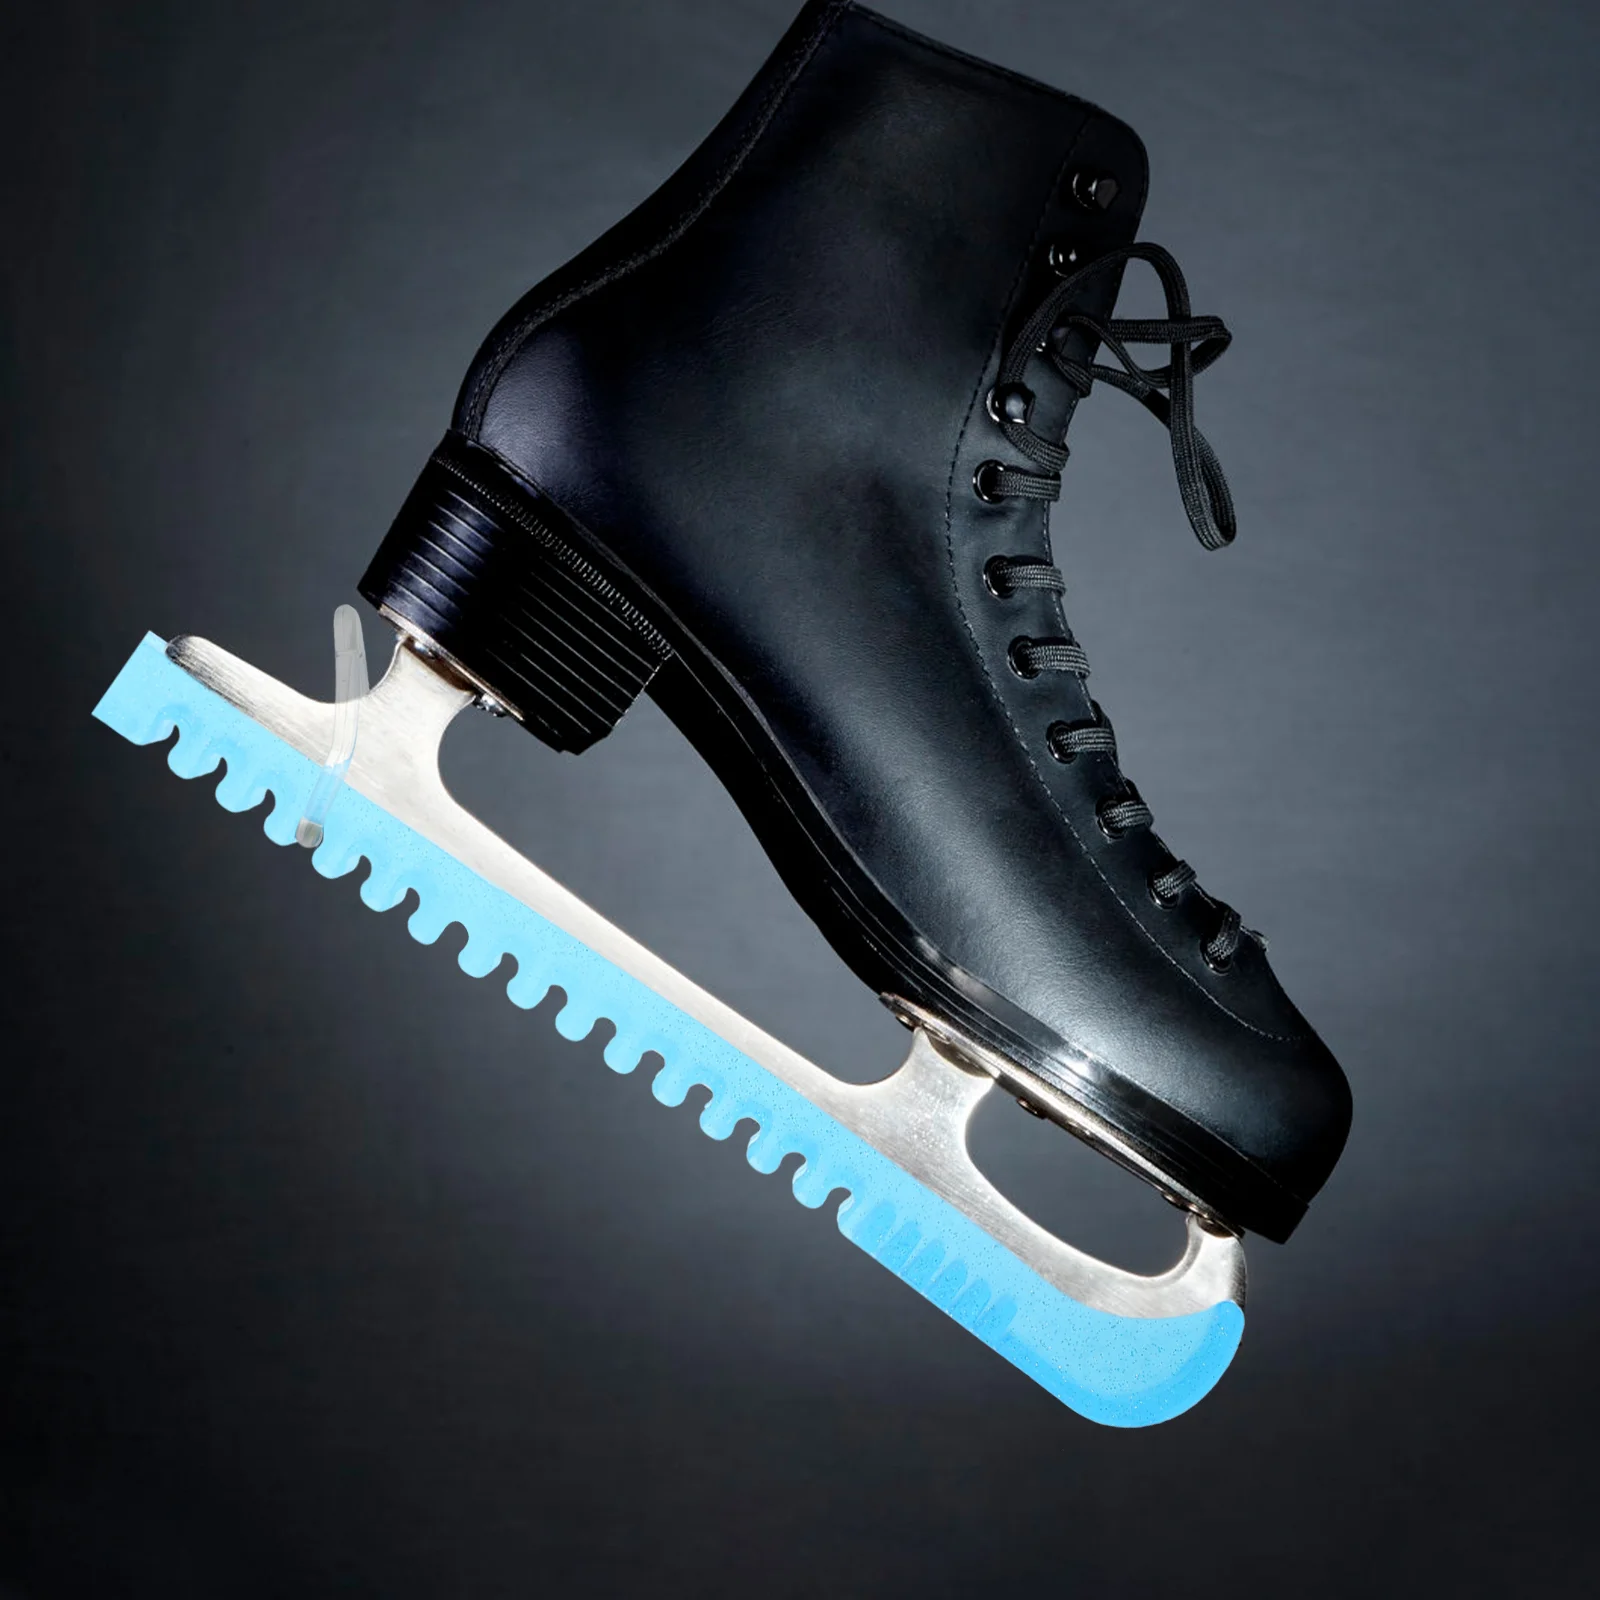 Ice Skates Guards Figure Skating Blade Accessory Blades Covers Shoes Protectors Convenient skate set elastic blades covers skates sleeves guards polyester protectors skating shoes protective hockey